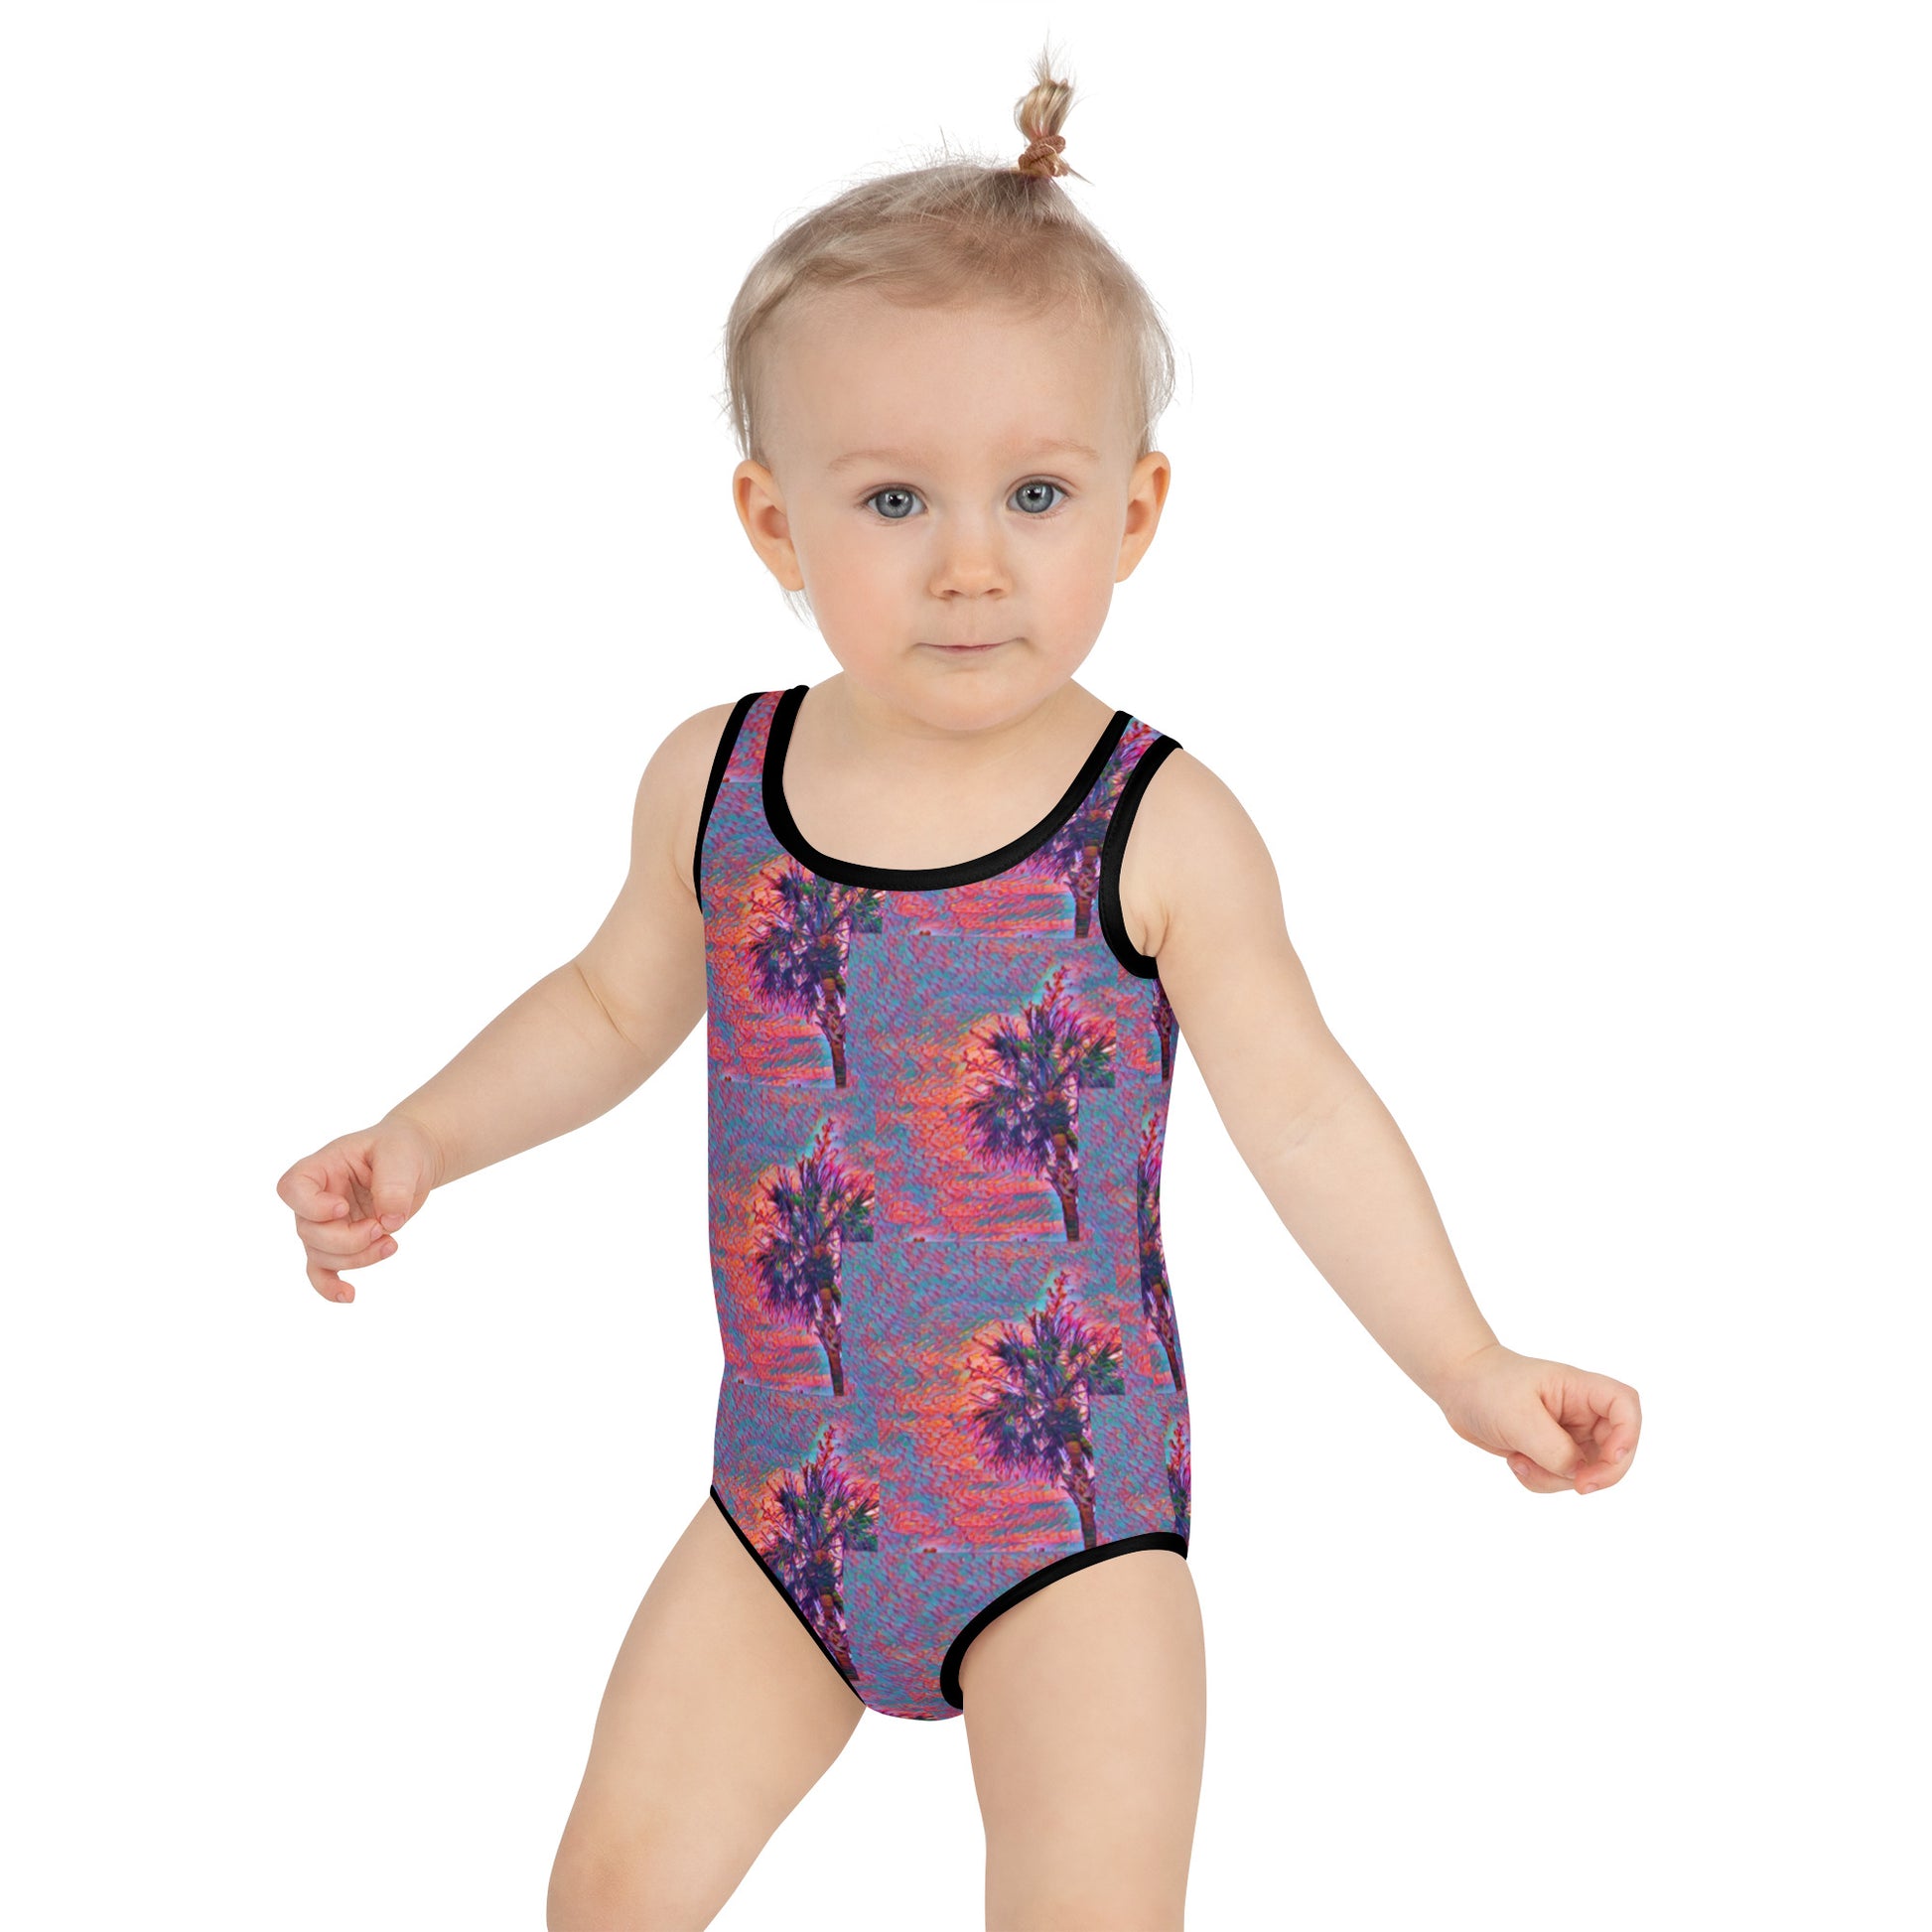 Blue Palms All-Over Print  Girls Kids Swimsuit with Sun Protection - A. Mandaline Art